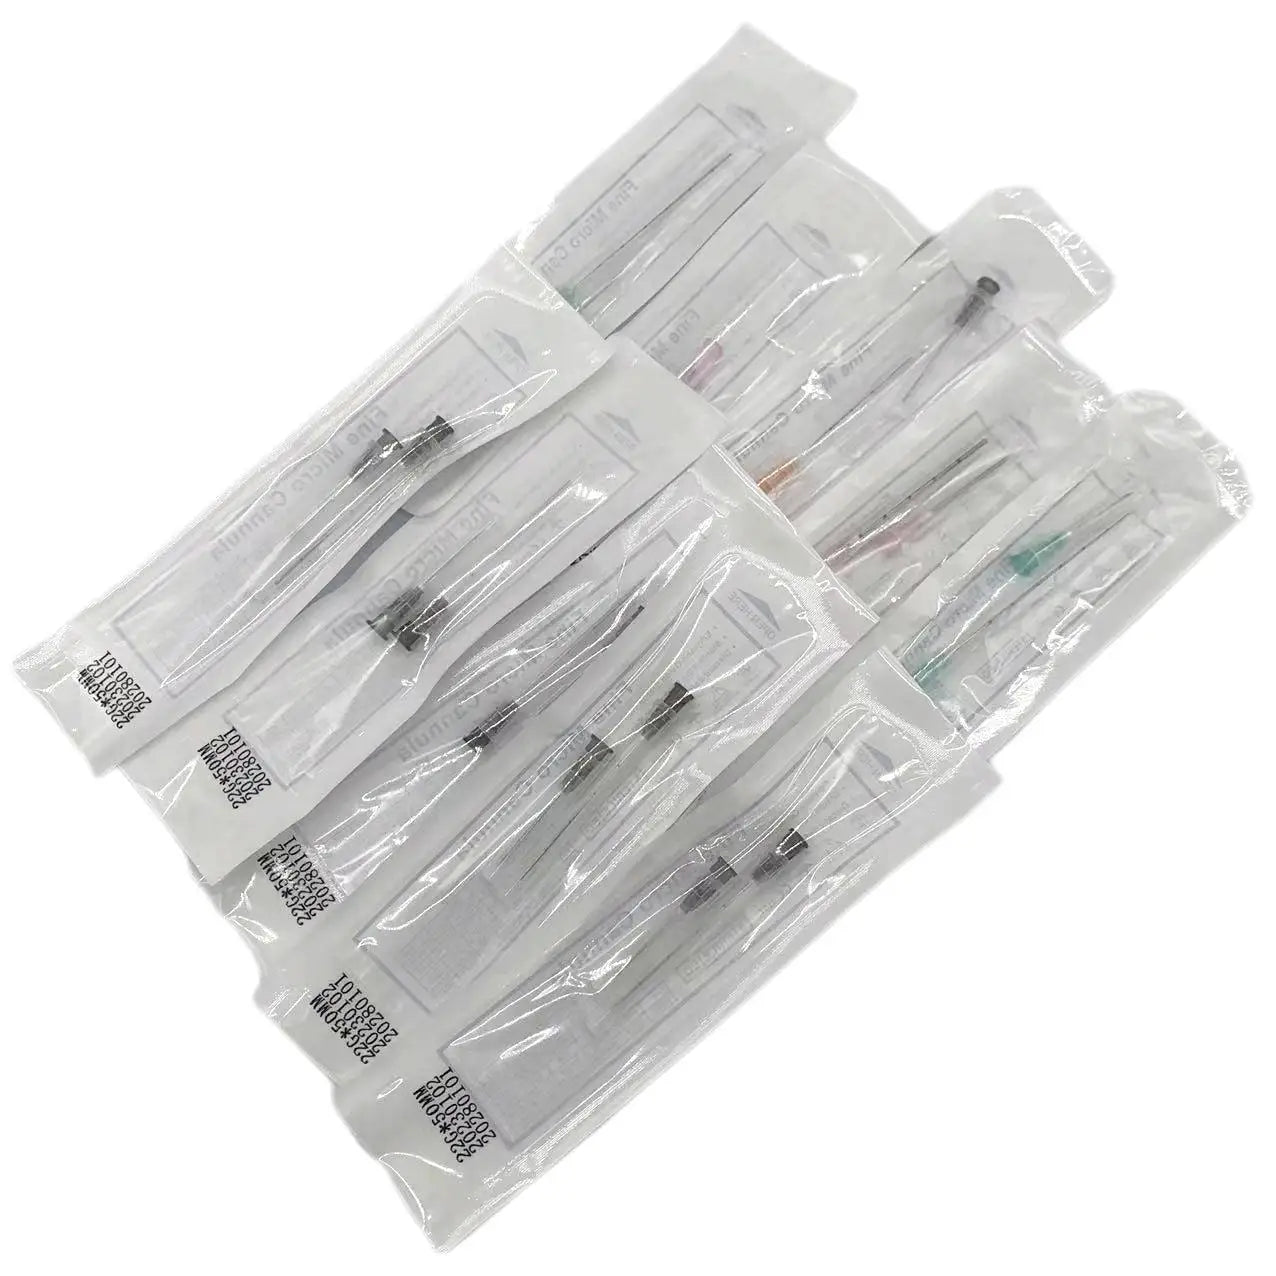 Blunt Tip Cannula Needle For Filler Injection 18G 21G 22G 23G 25G 27G 30G,2pcs/pack*10